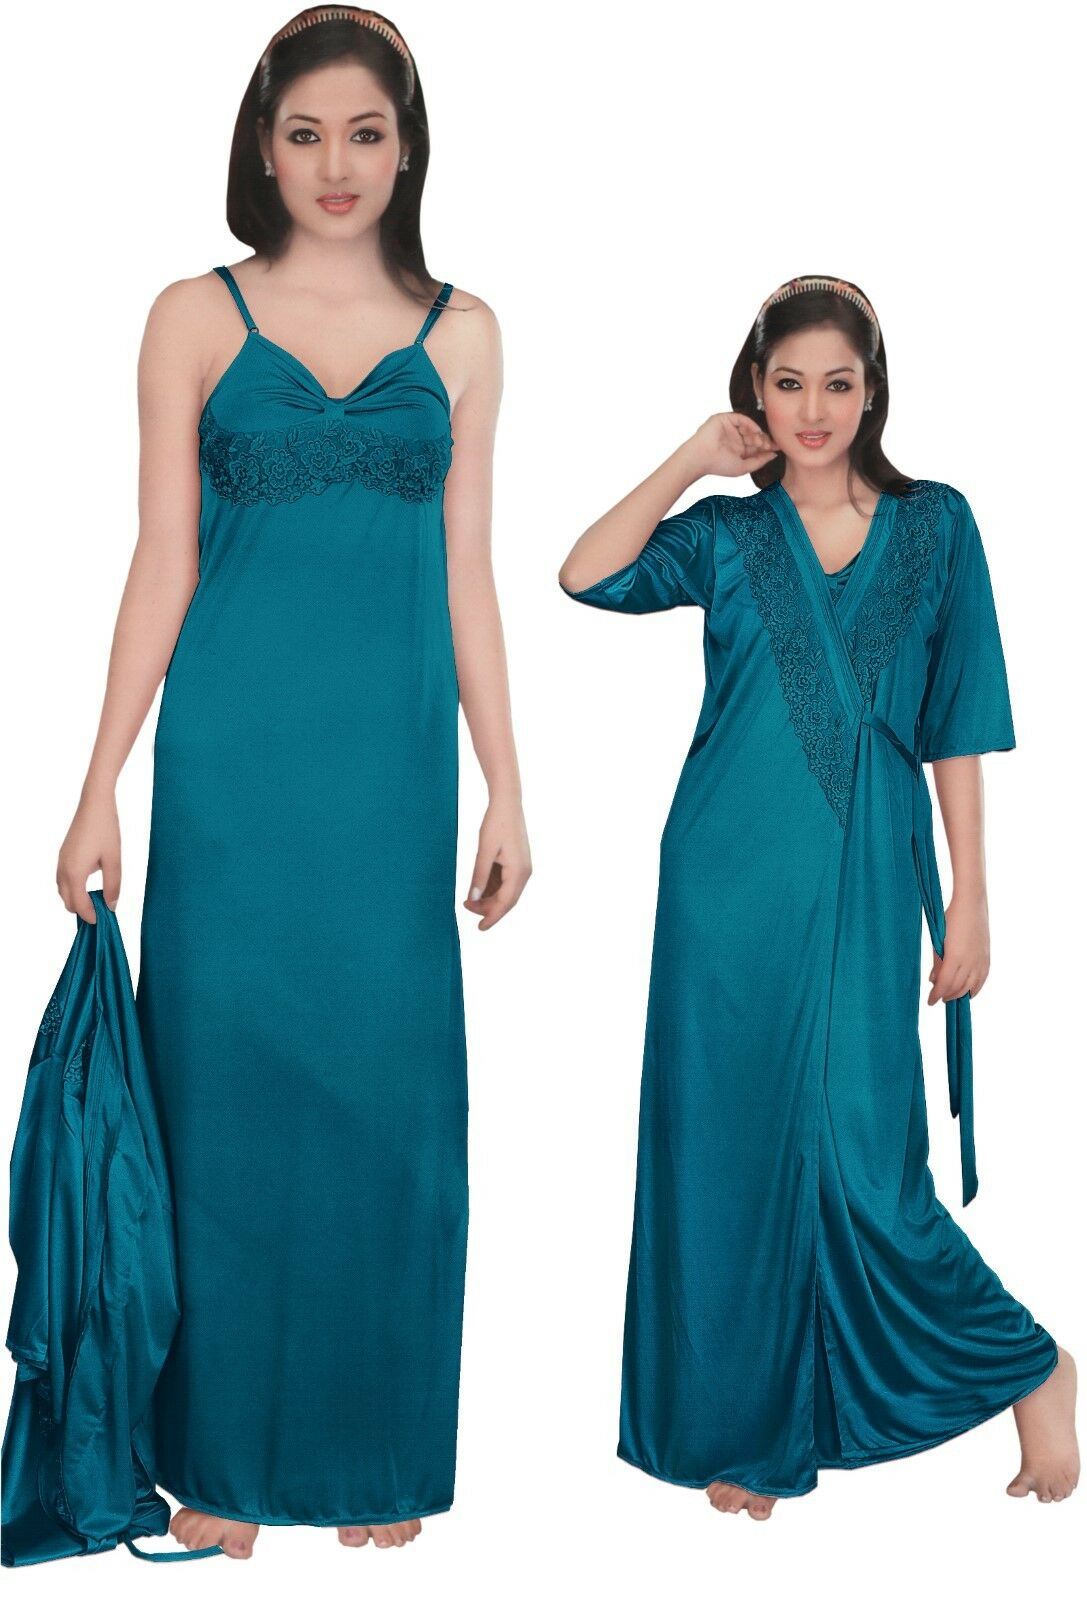 Teal / One Size: Regular Women Strappy 2 Pcs Satin Long Nighty and Robe The Orange Tags